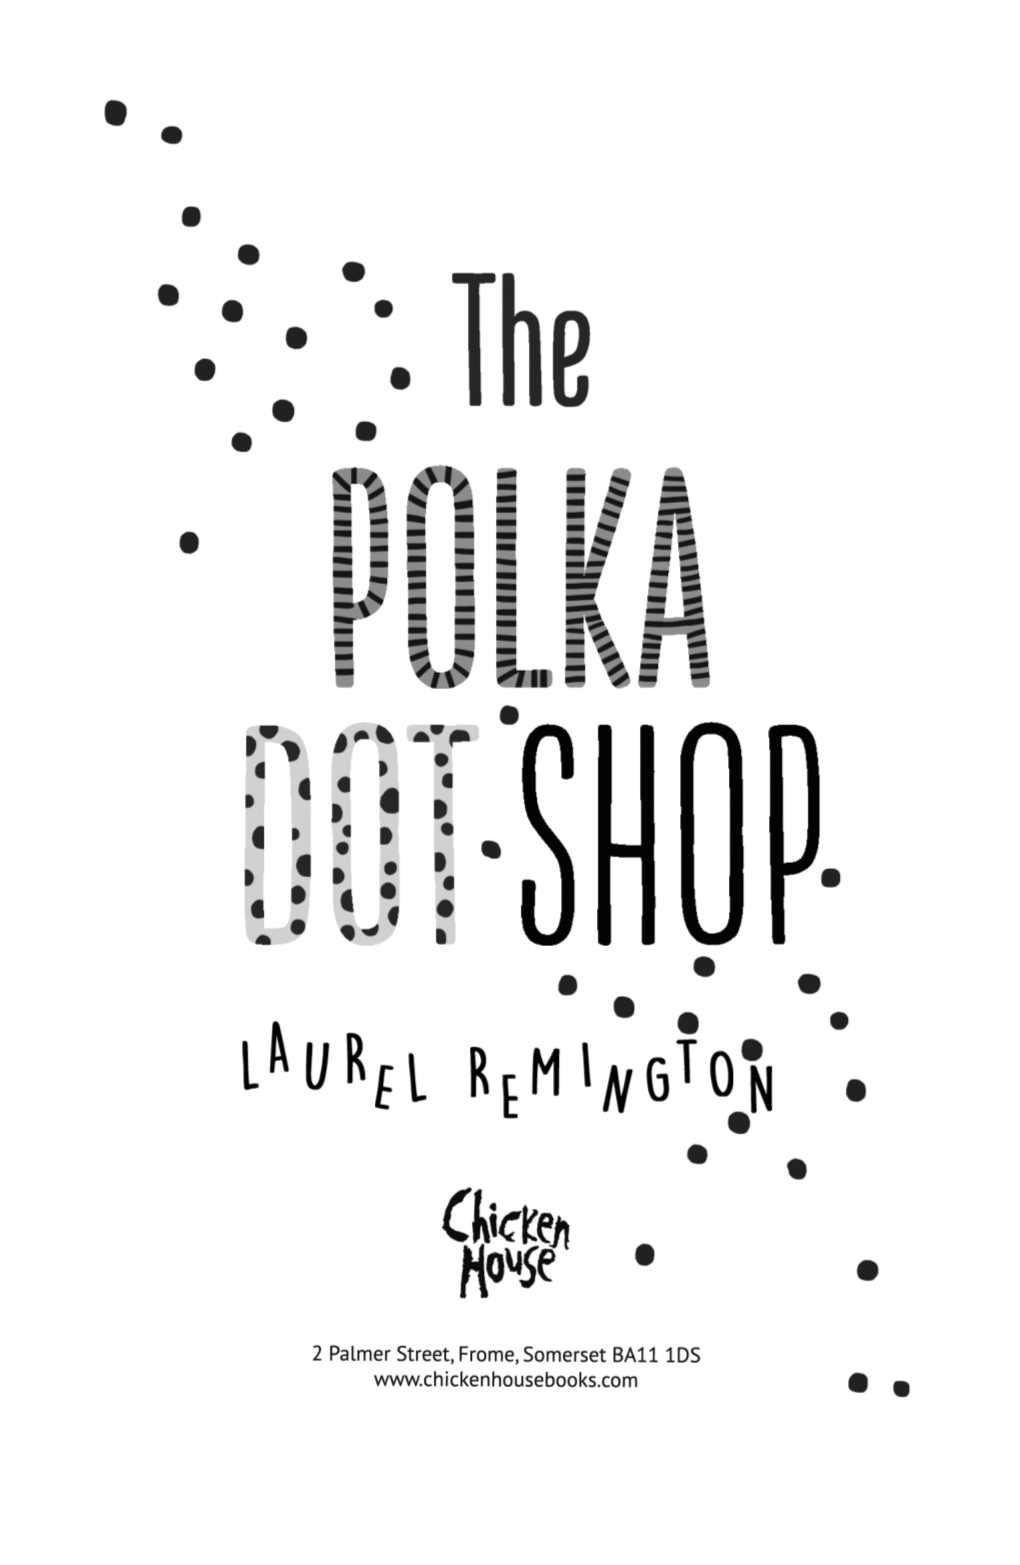 The Polka Dot Shop Pages Chicken House 24/04/2018 11:51 Page Iii the Polka Dot Shop Pages Chicken House 24/04/2018 11:51 Page Iv